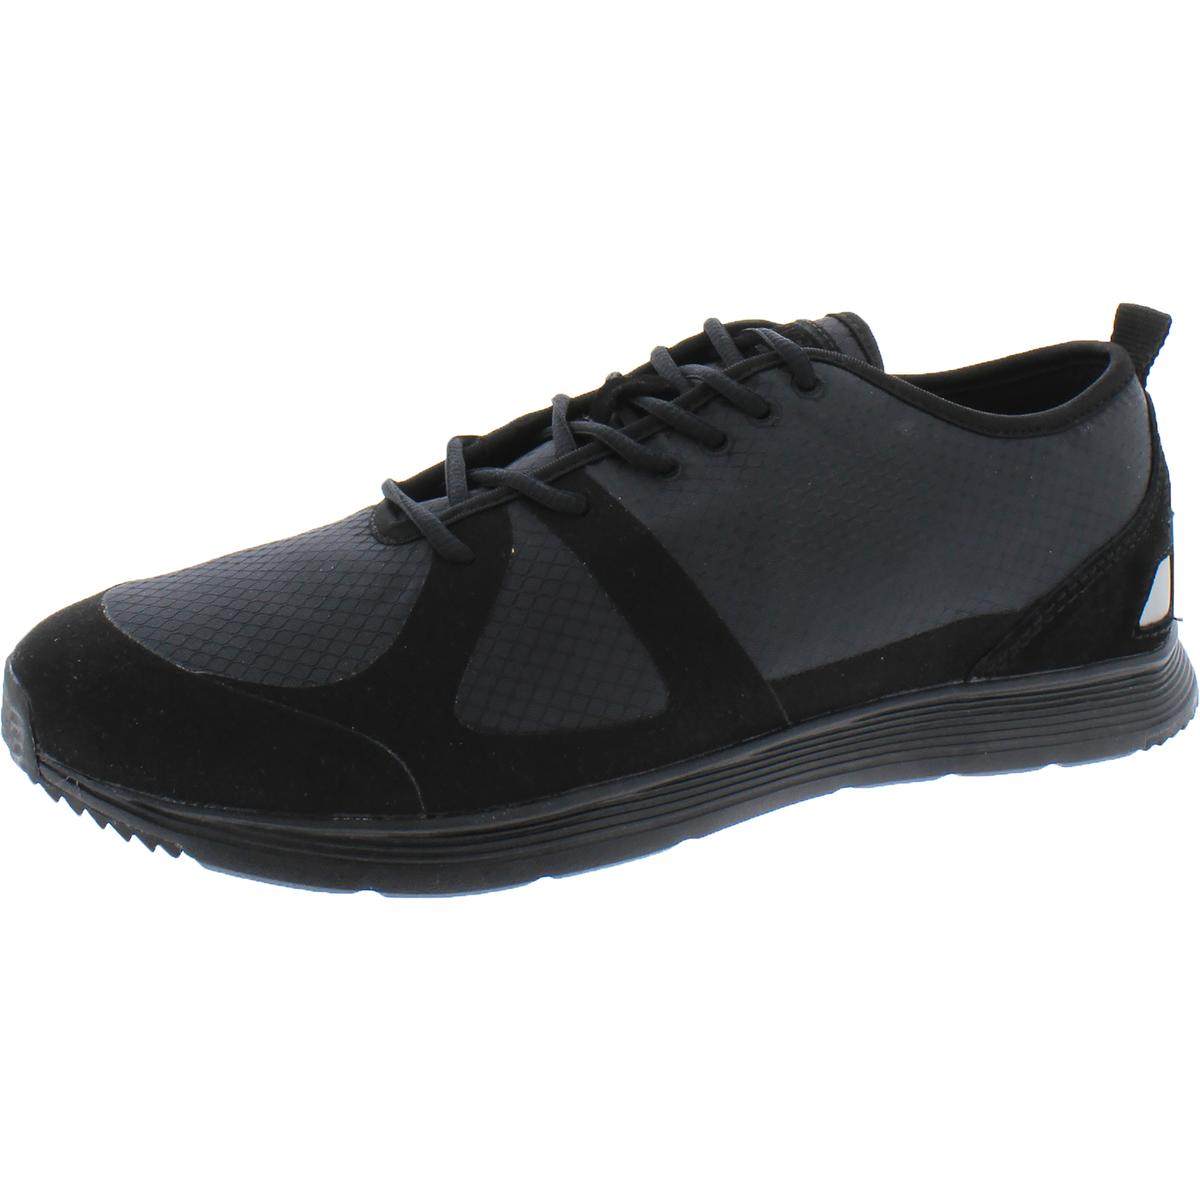 Ransom homme Path Lite Mixed Media Low Top Chaussures De Marche Baskets BHFO 4676 